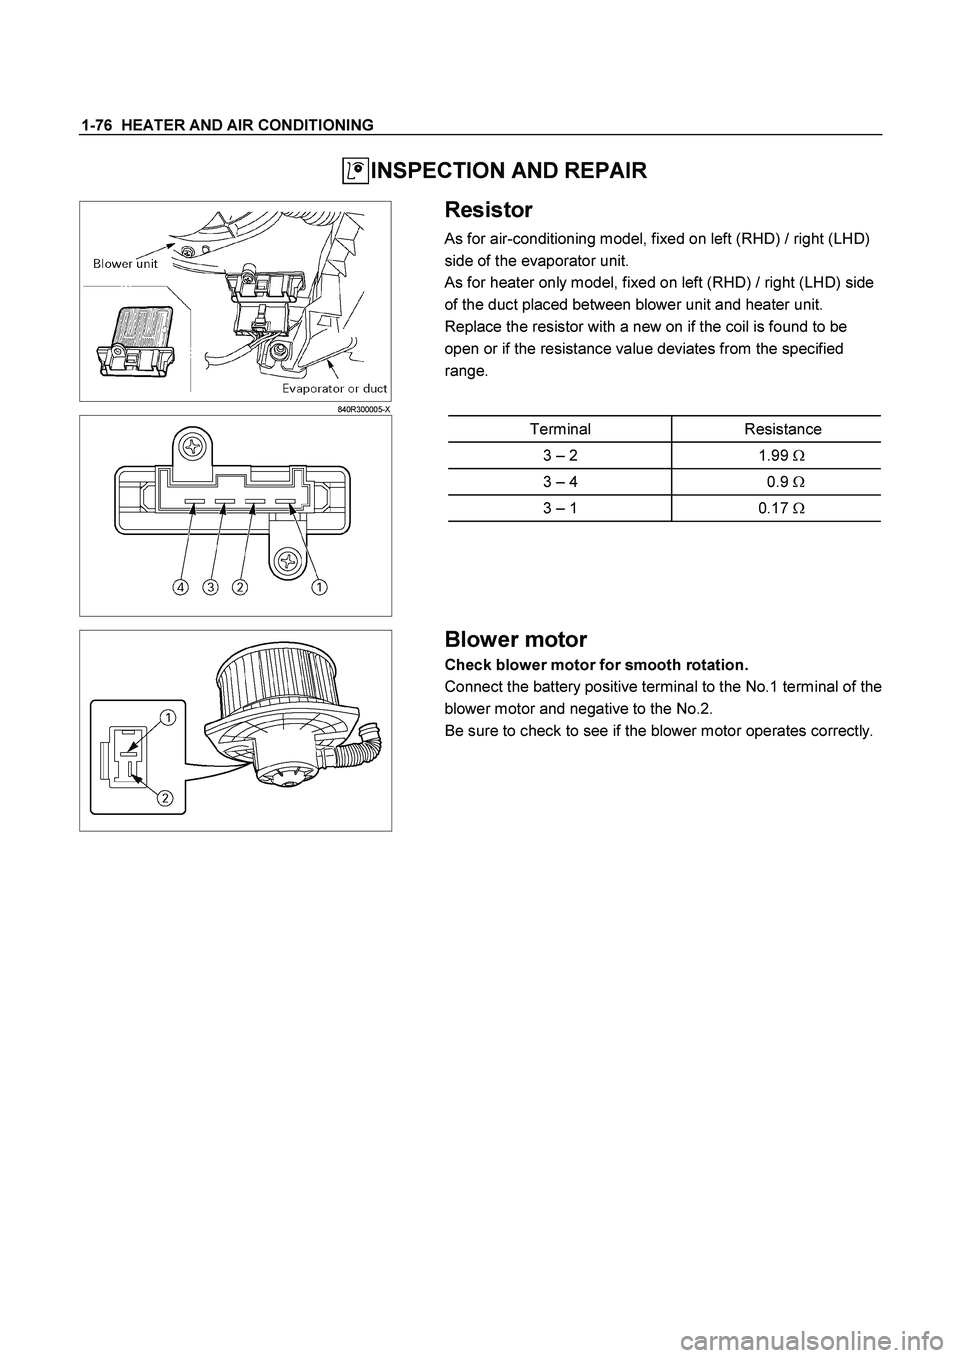 ISUZU TF SERIES 2004  Workshop Manual 1-76  HEATER AND AIR CONDITIONING 
 INSPECTION AND REPAIR 
  
 
 
  840R300005-X 
 
 Resistor 
As for air-conditioning model, fixed on left (RHD) / right (LHD) 
side of the evaporator unit. 
As for he